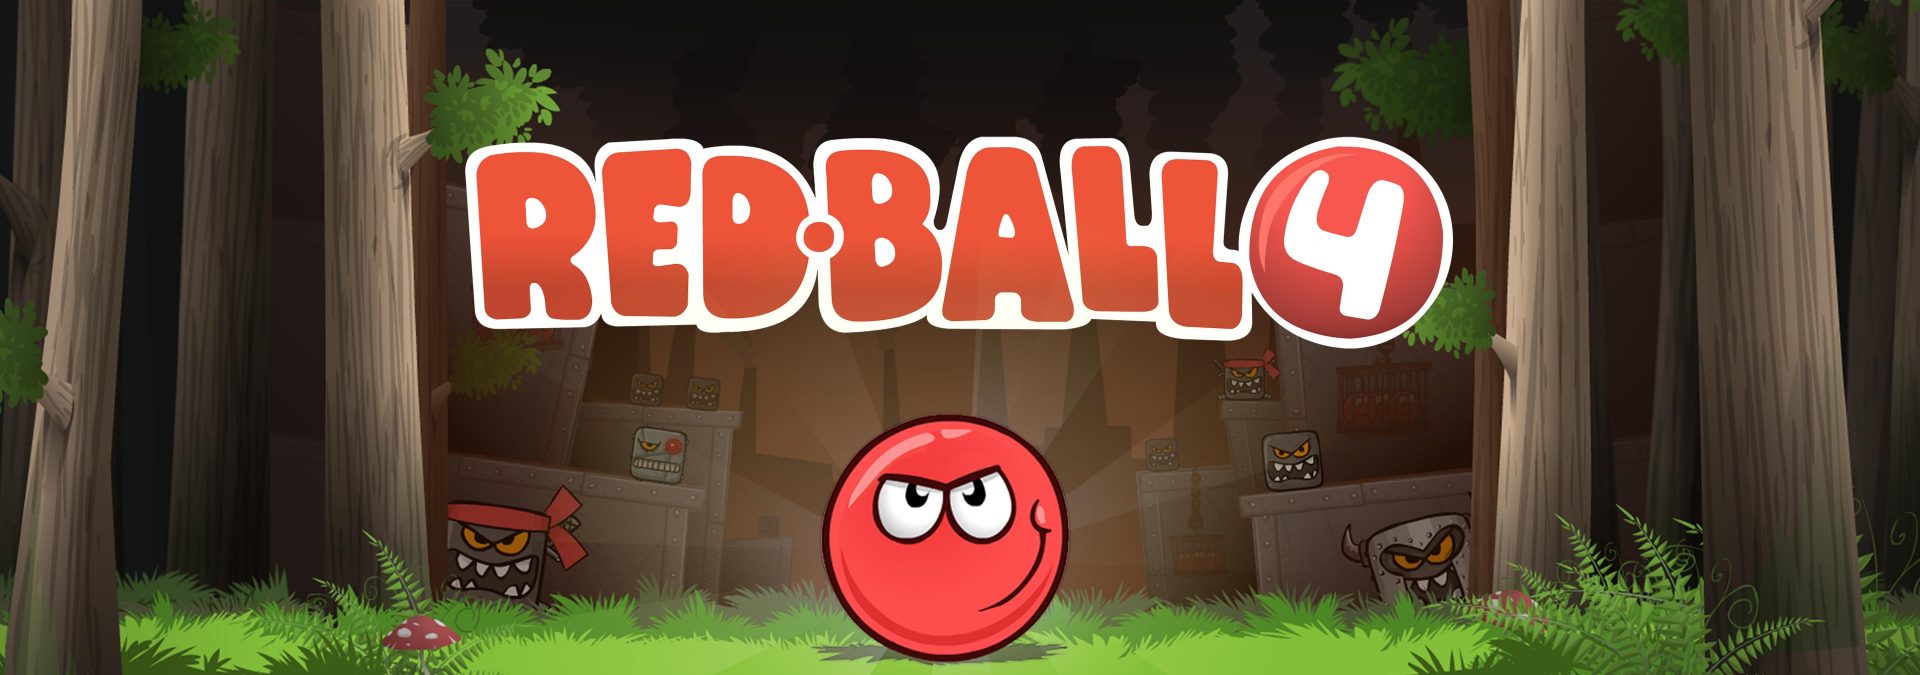 red ball red ball